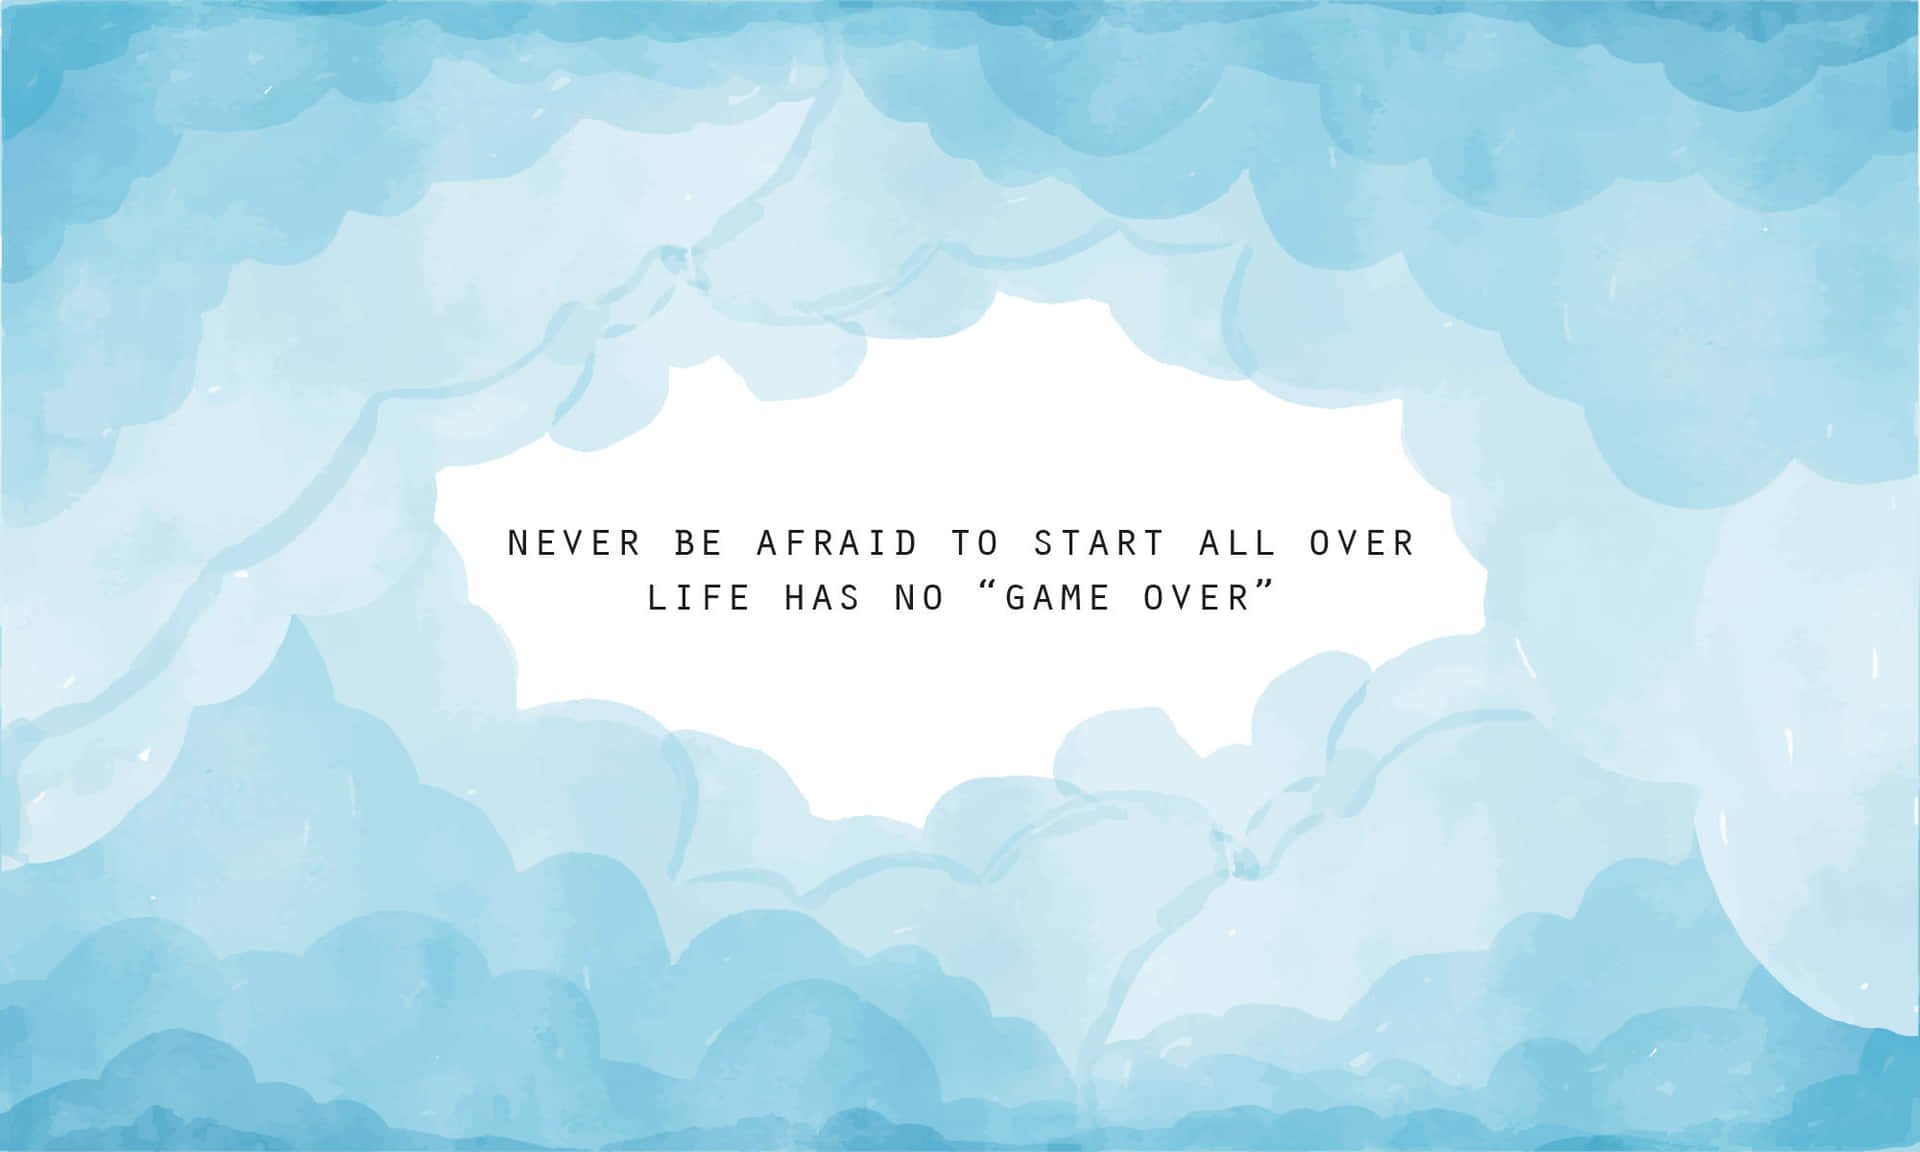 12 Positive Quote Wallpapers For Phone To Brighten Up Your Days